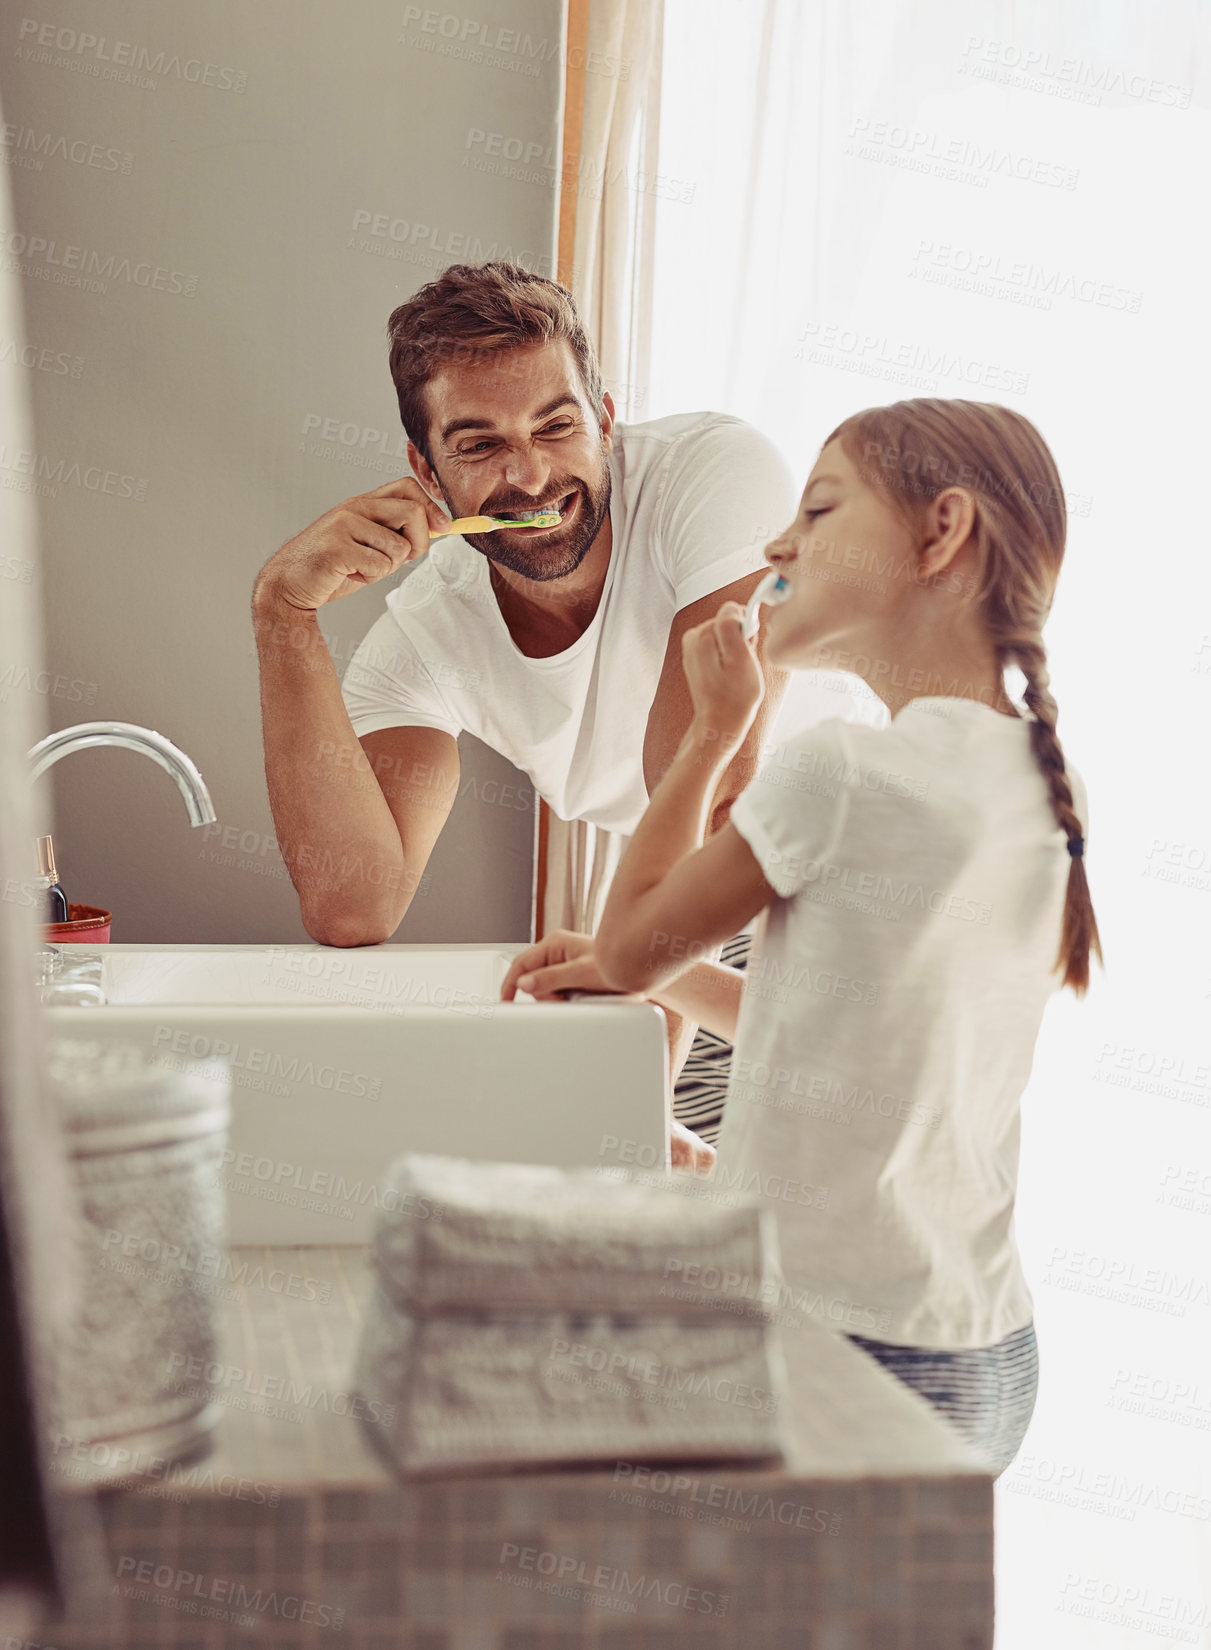 Buy stock photo Shot of a happy father and his little girl washing their hands together in the bathroom